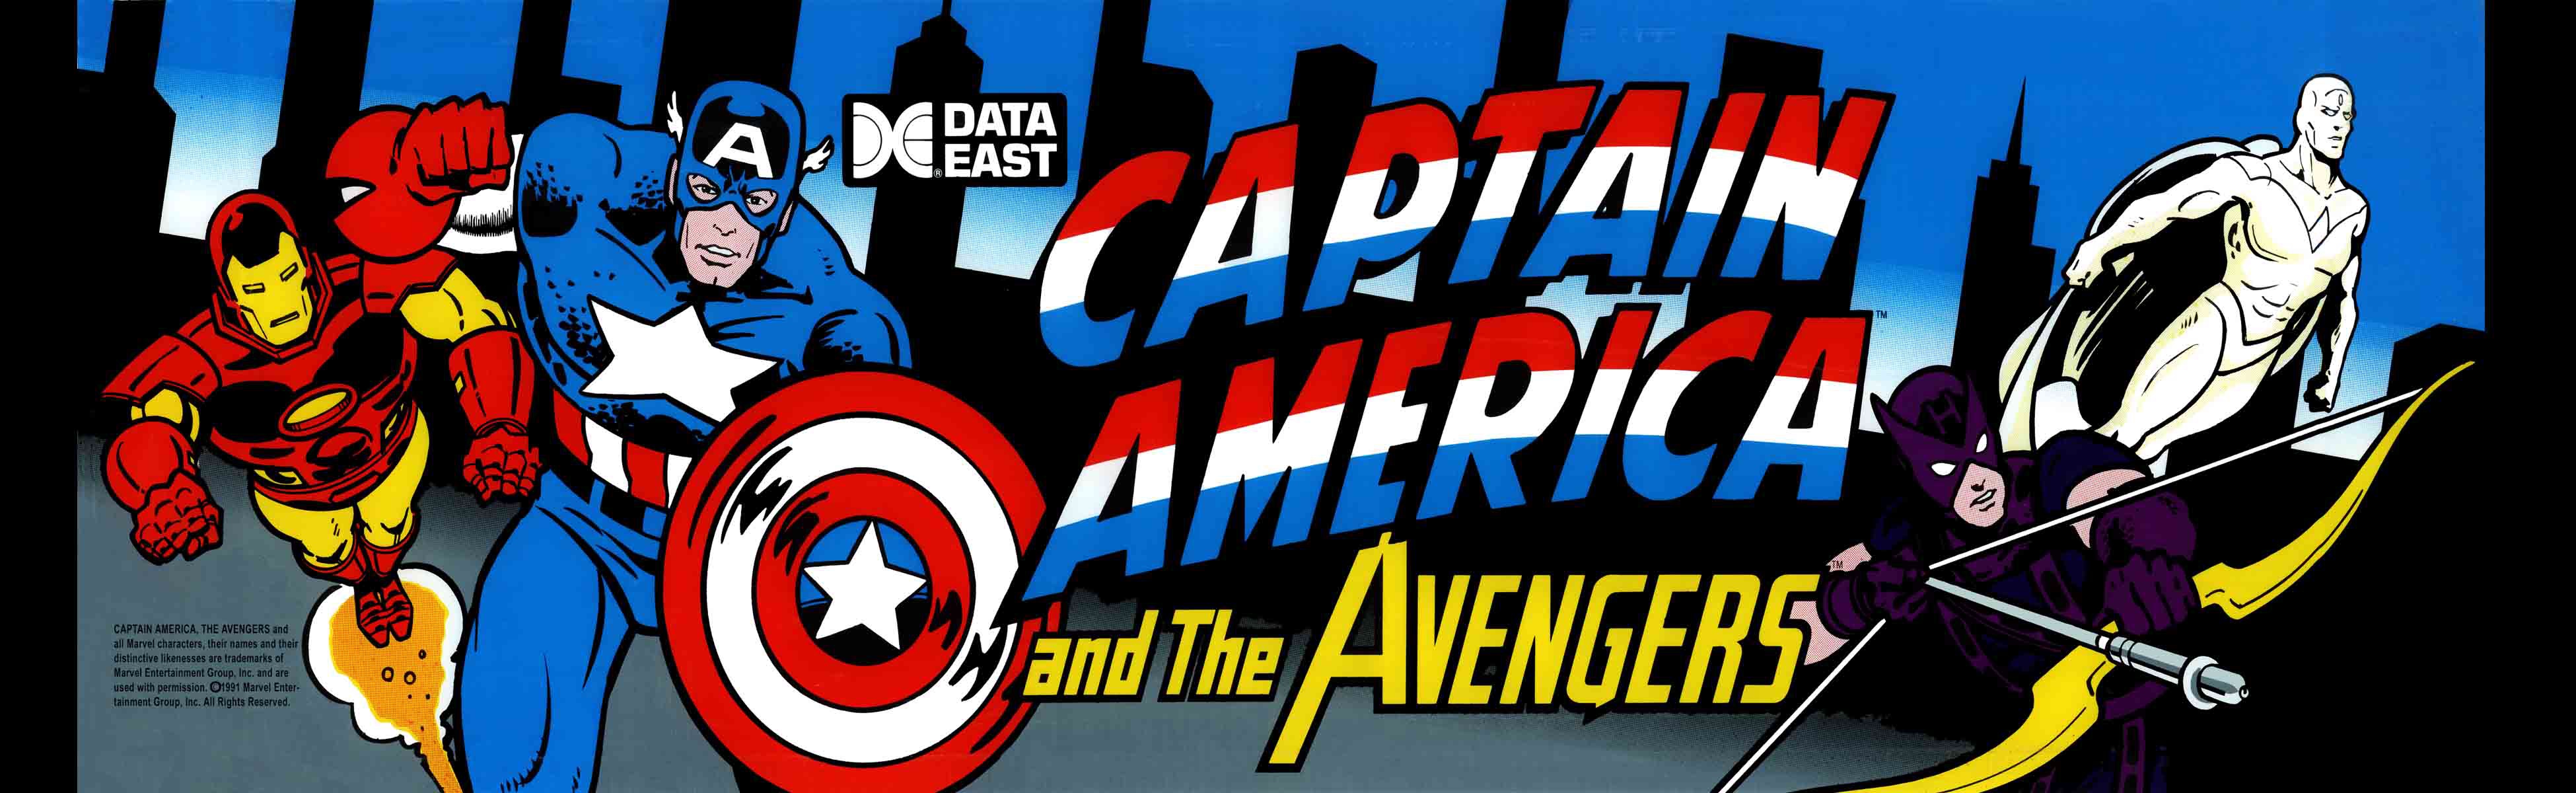 You are currently viewing A World of Games: Captain America and the Avengers